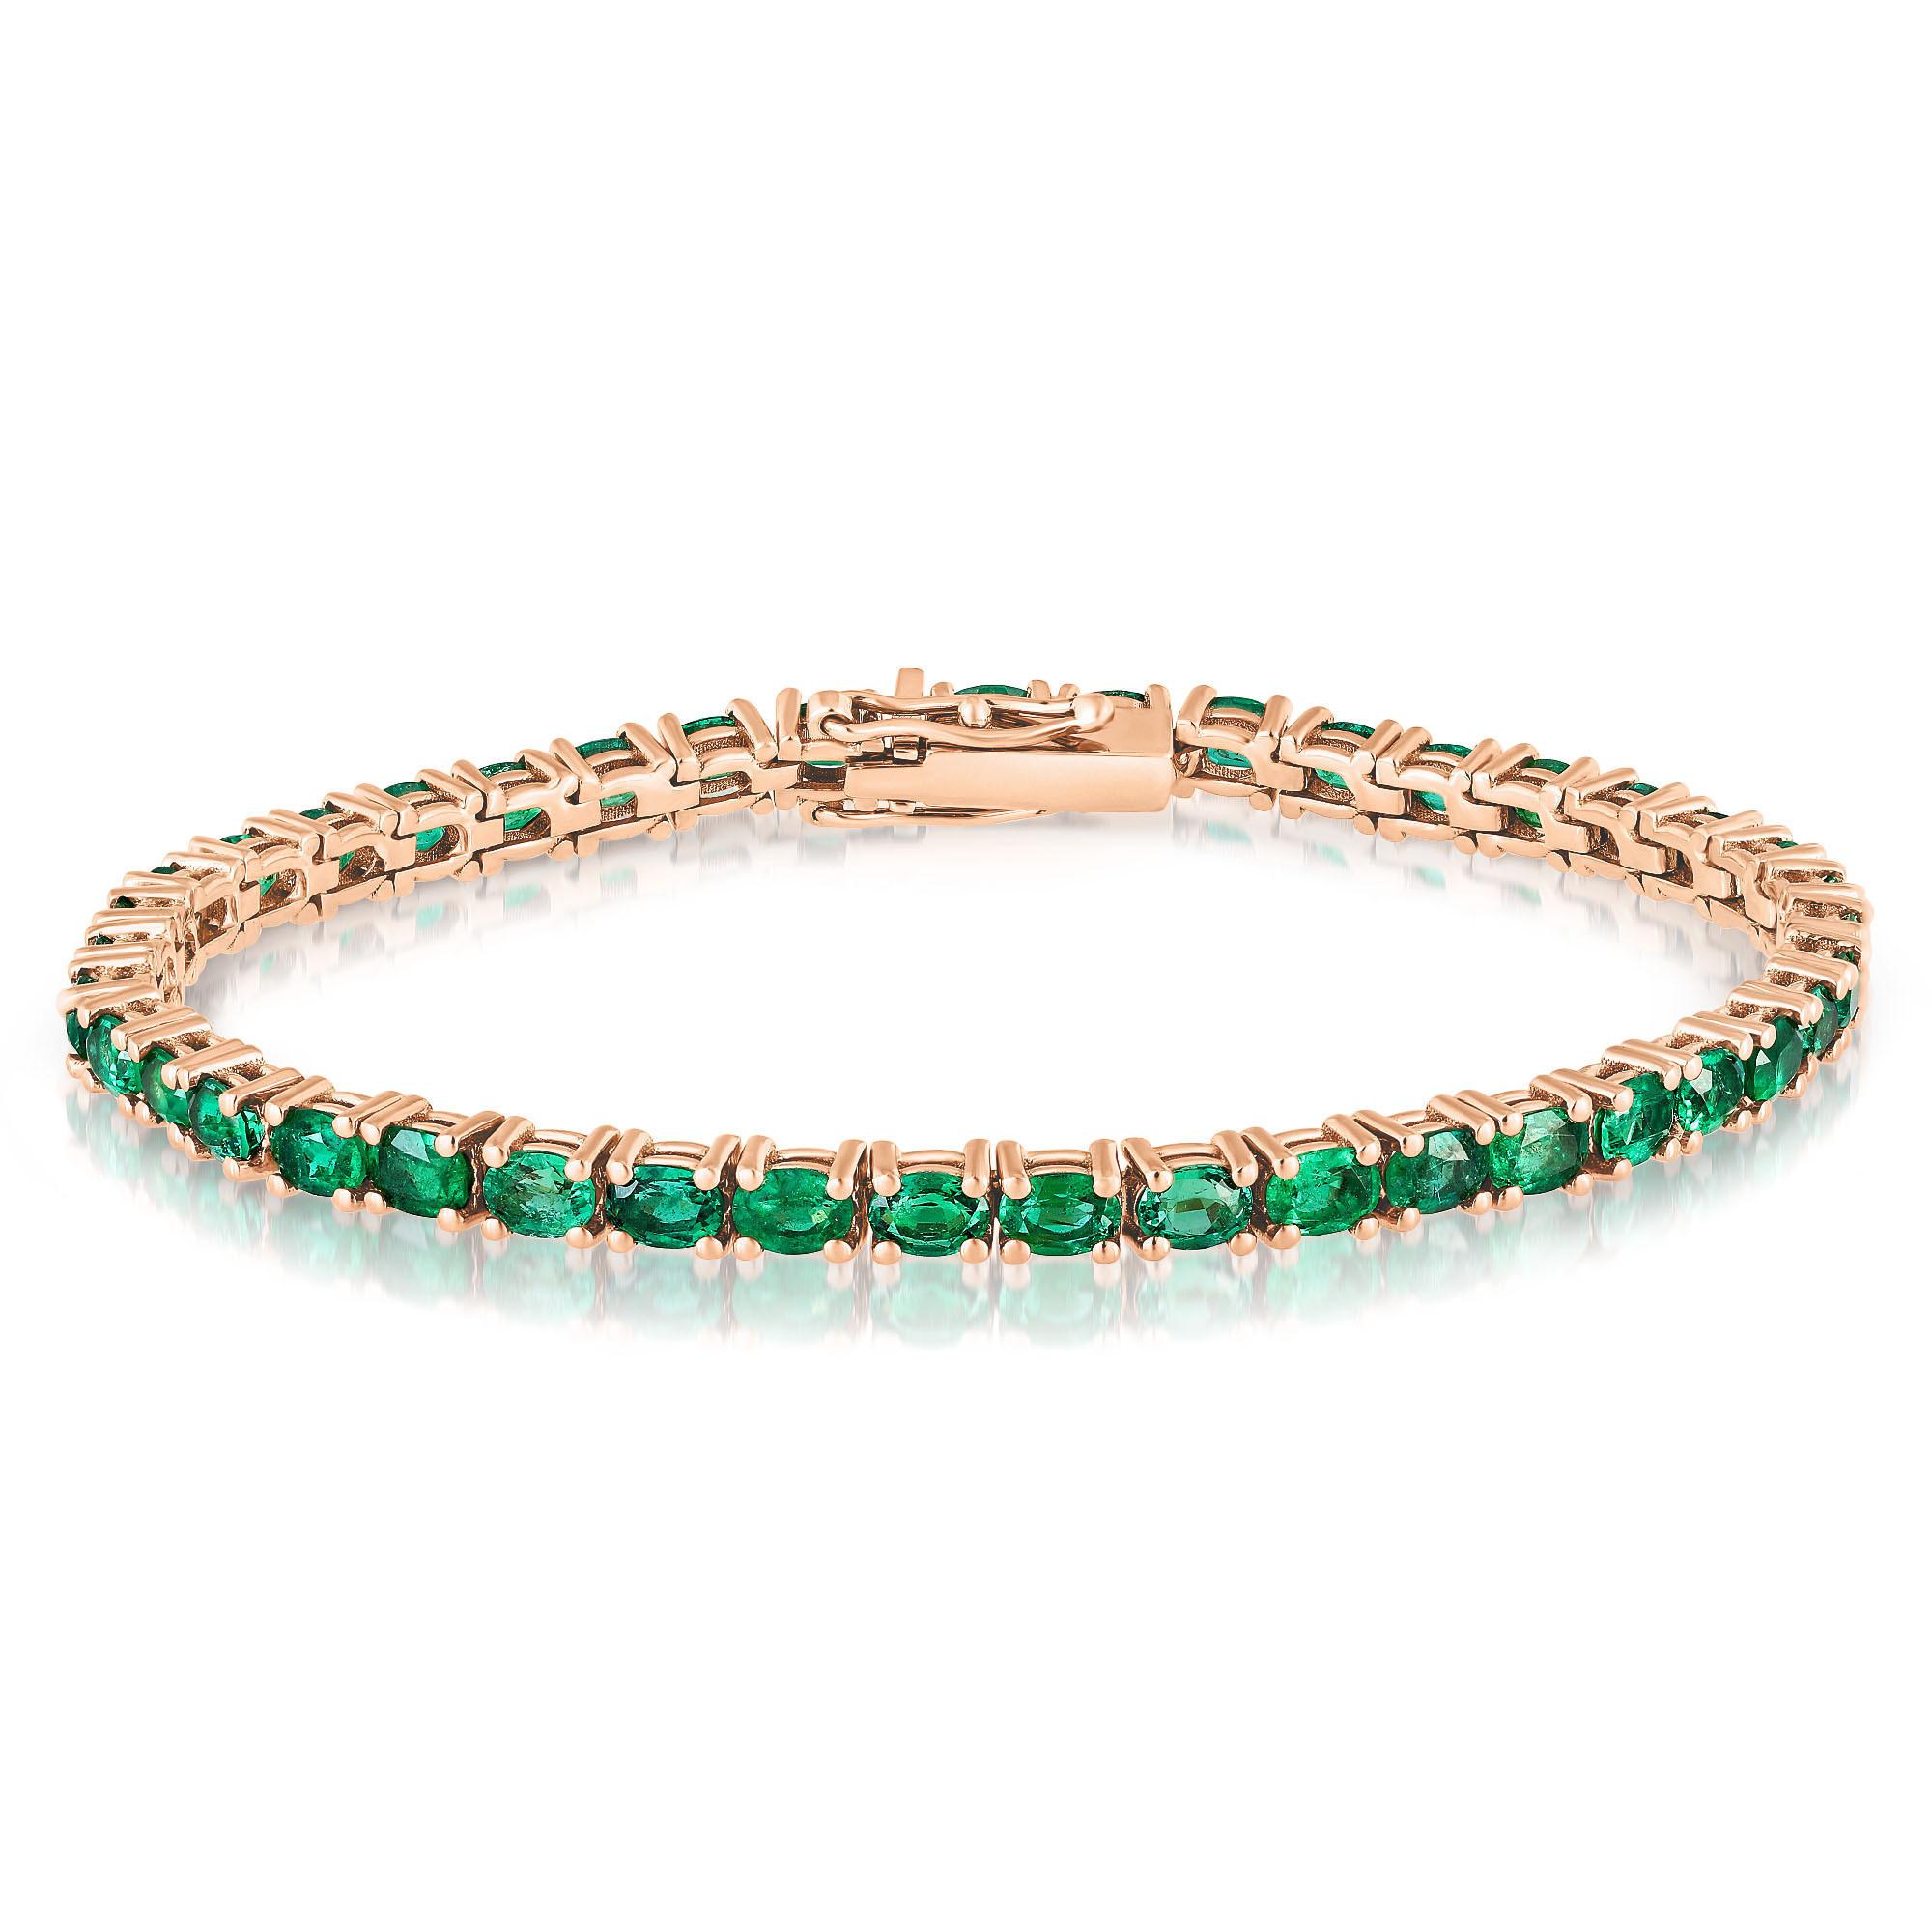 Get ready to amp up your wrist with our 6 Carat Oval-Shaped Emerald Tennis Bracelet!